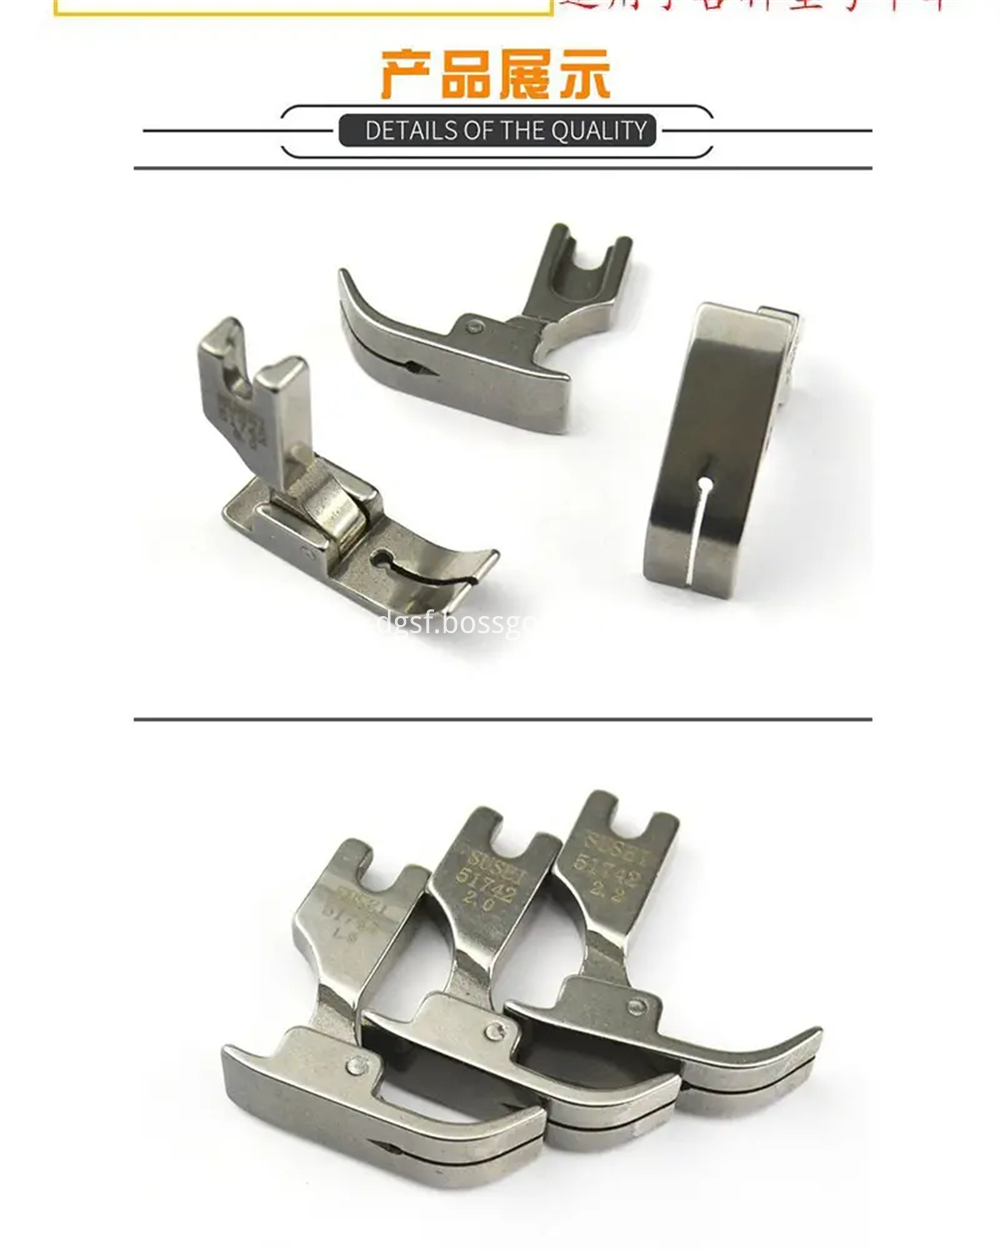 Special Presser Foot For Industrial Flat Knitting Thin Material 7 Jpg